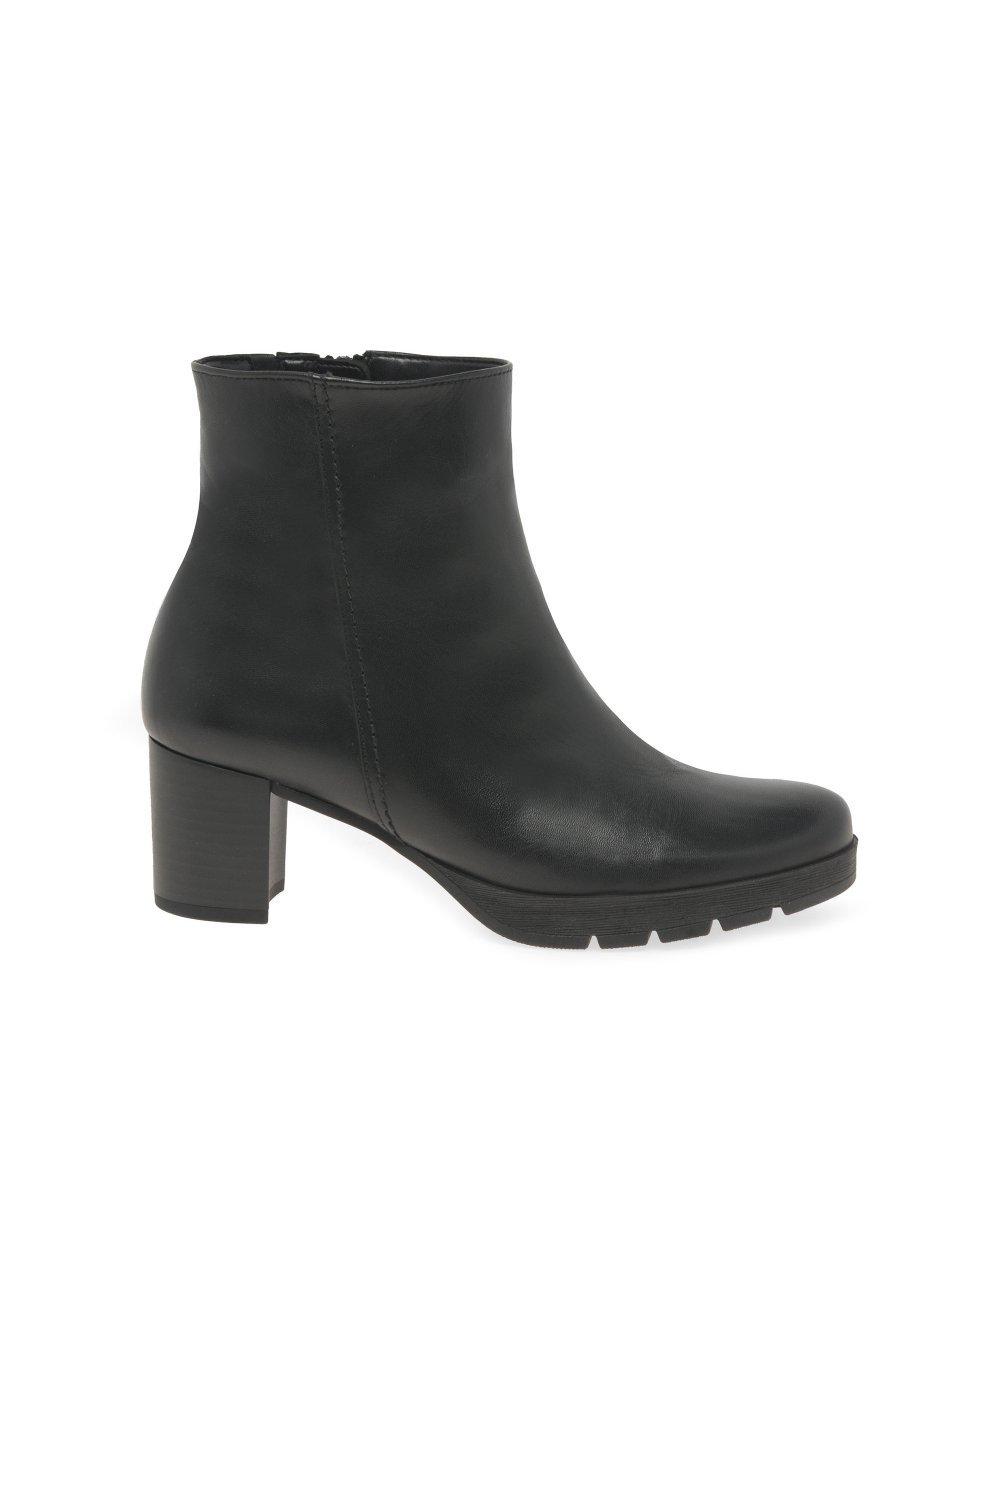 'essential' ankle boots